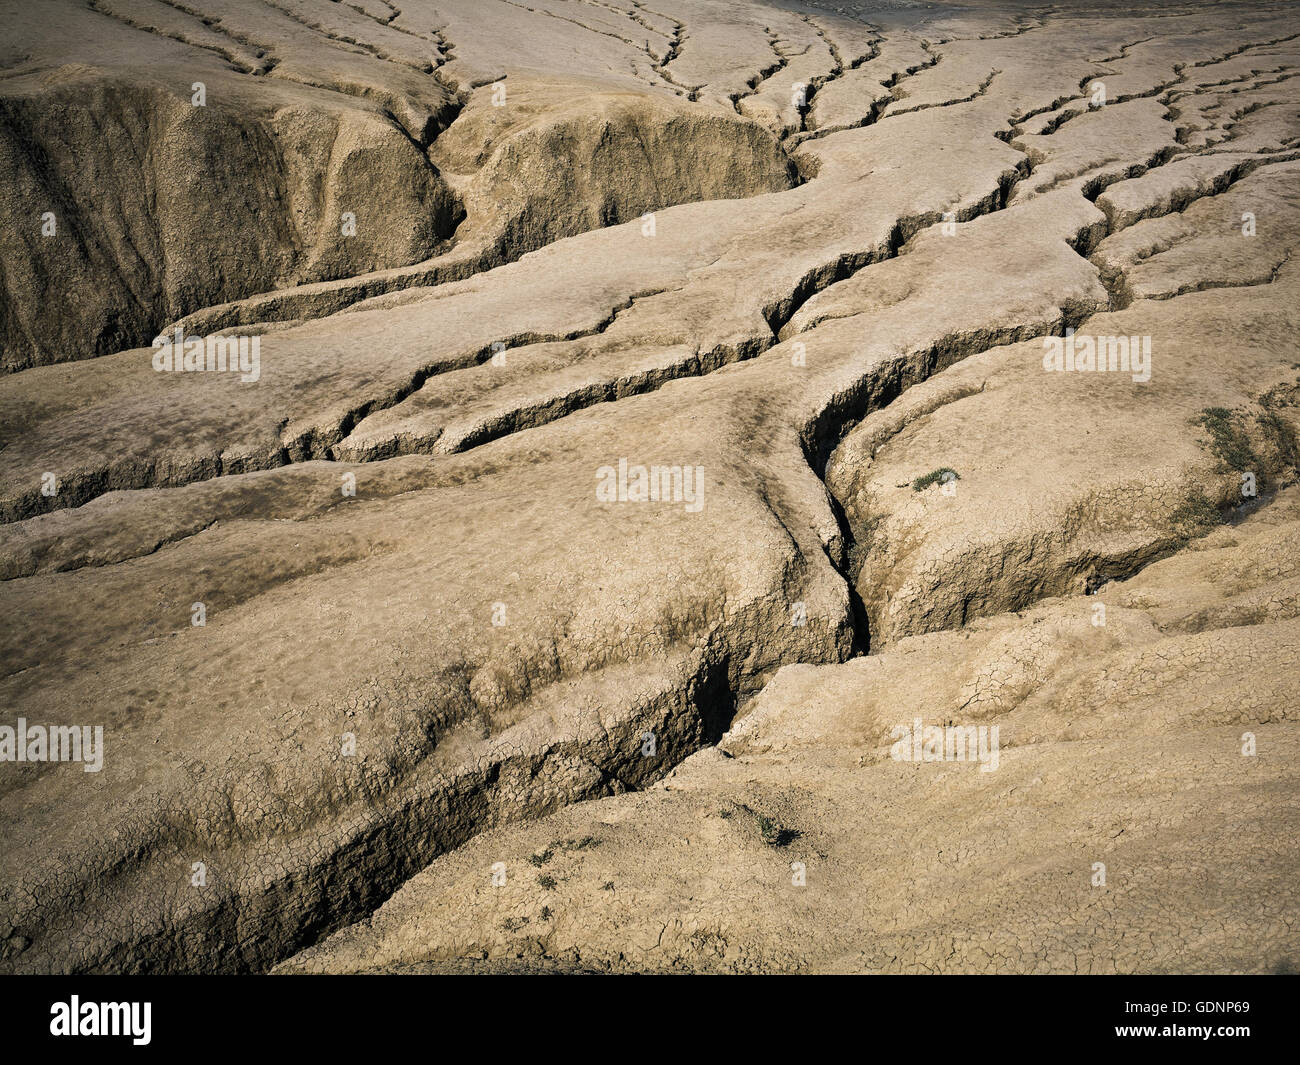 Cracked earth shaped by mud volcanoes Stock Photo